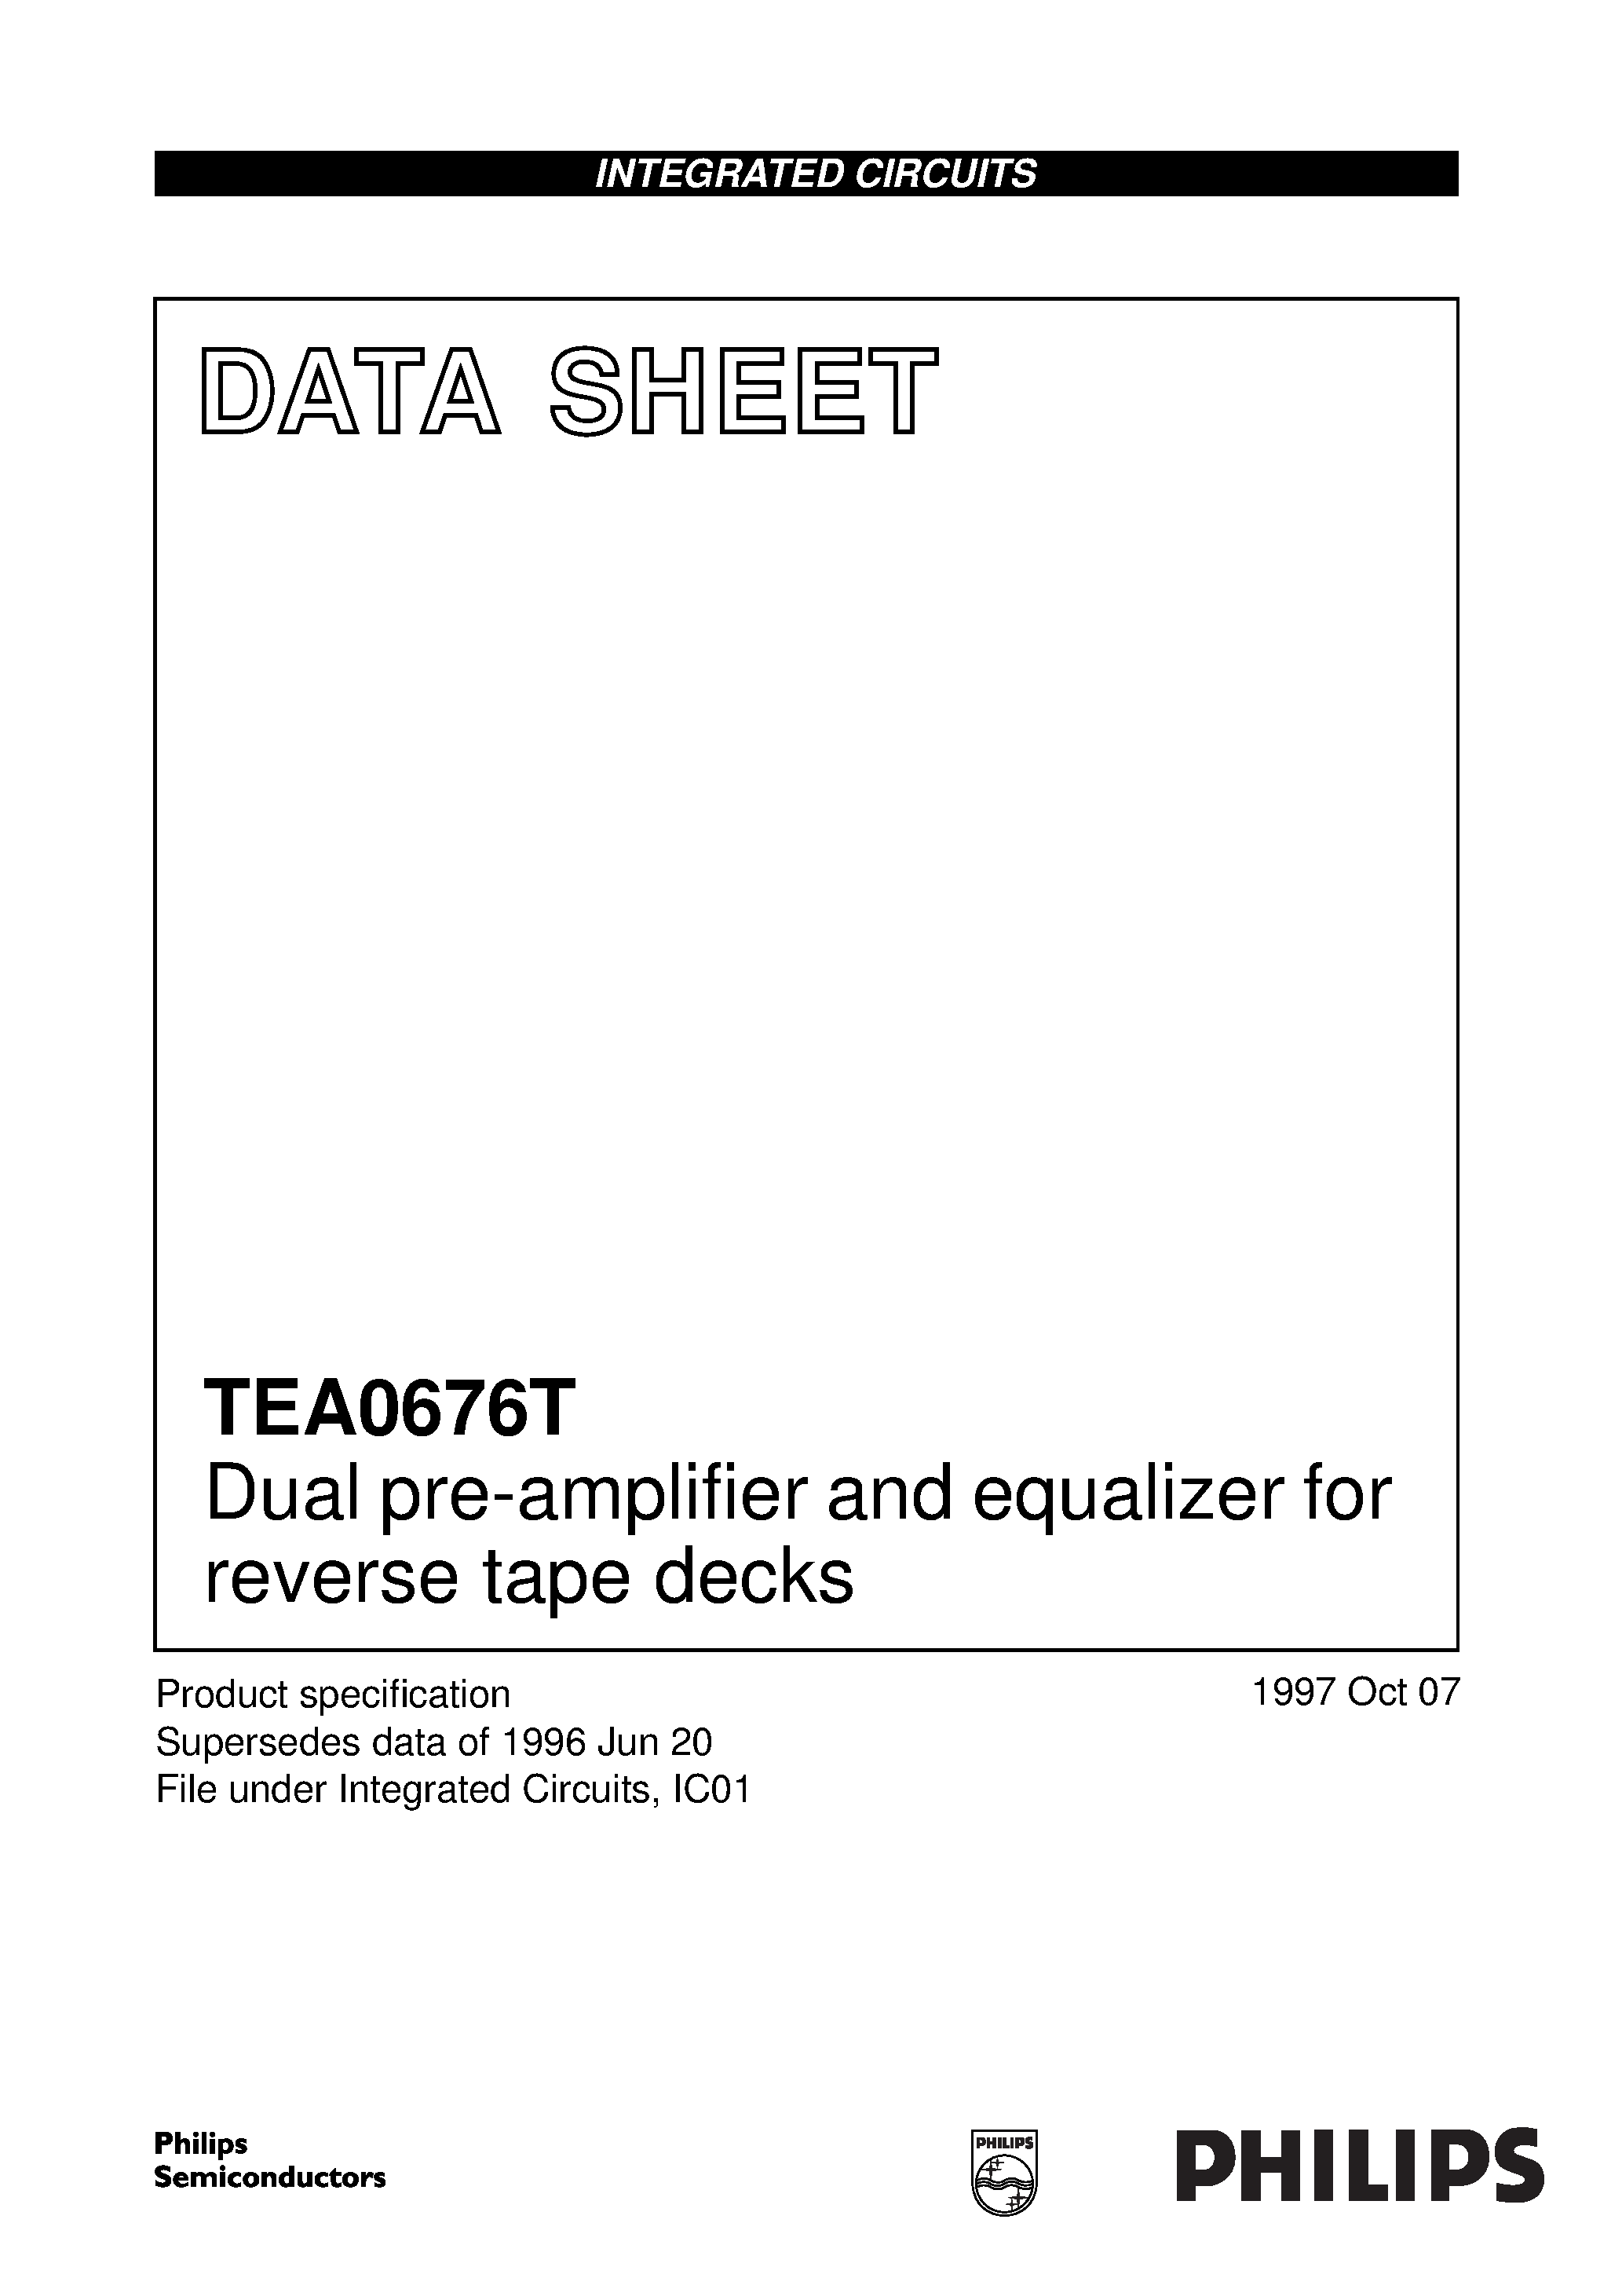 Datasheet TEA0676T - Dual pre-amplifier and equalizer for reverse tape decks page 1